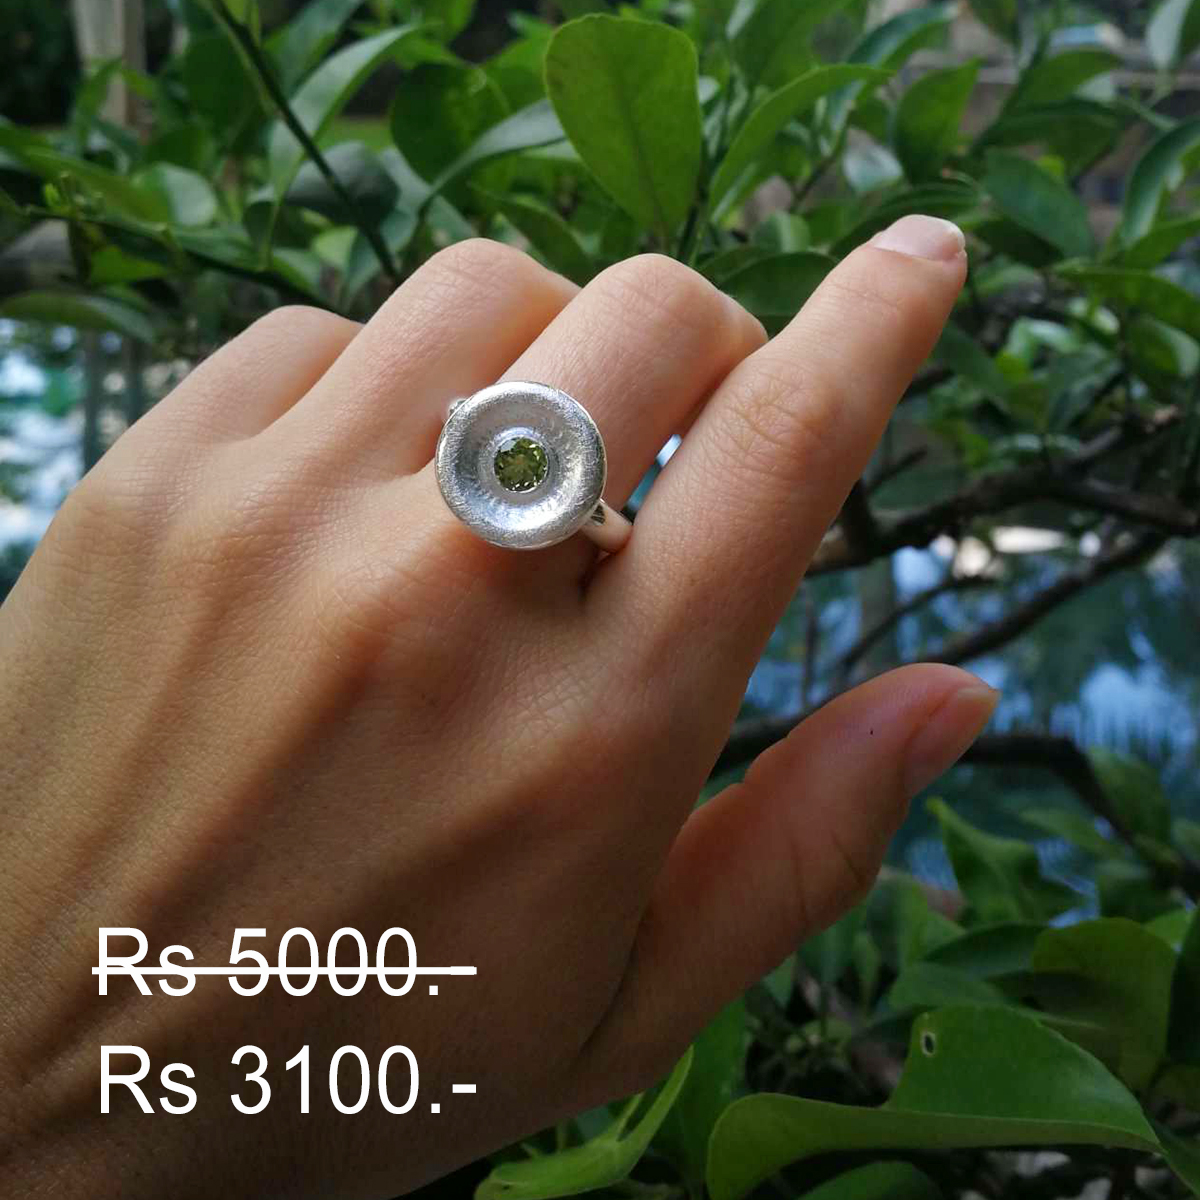 Silver ring on promotion - Mauritius